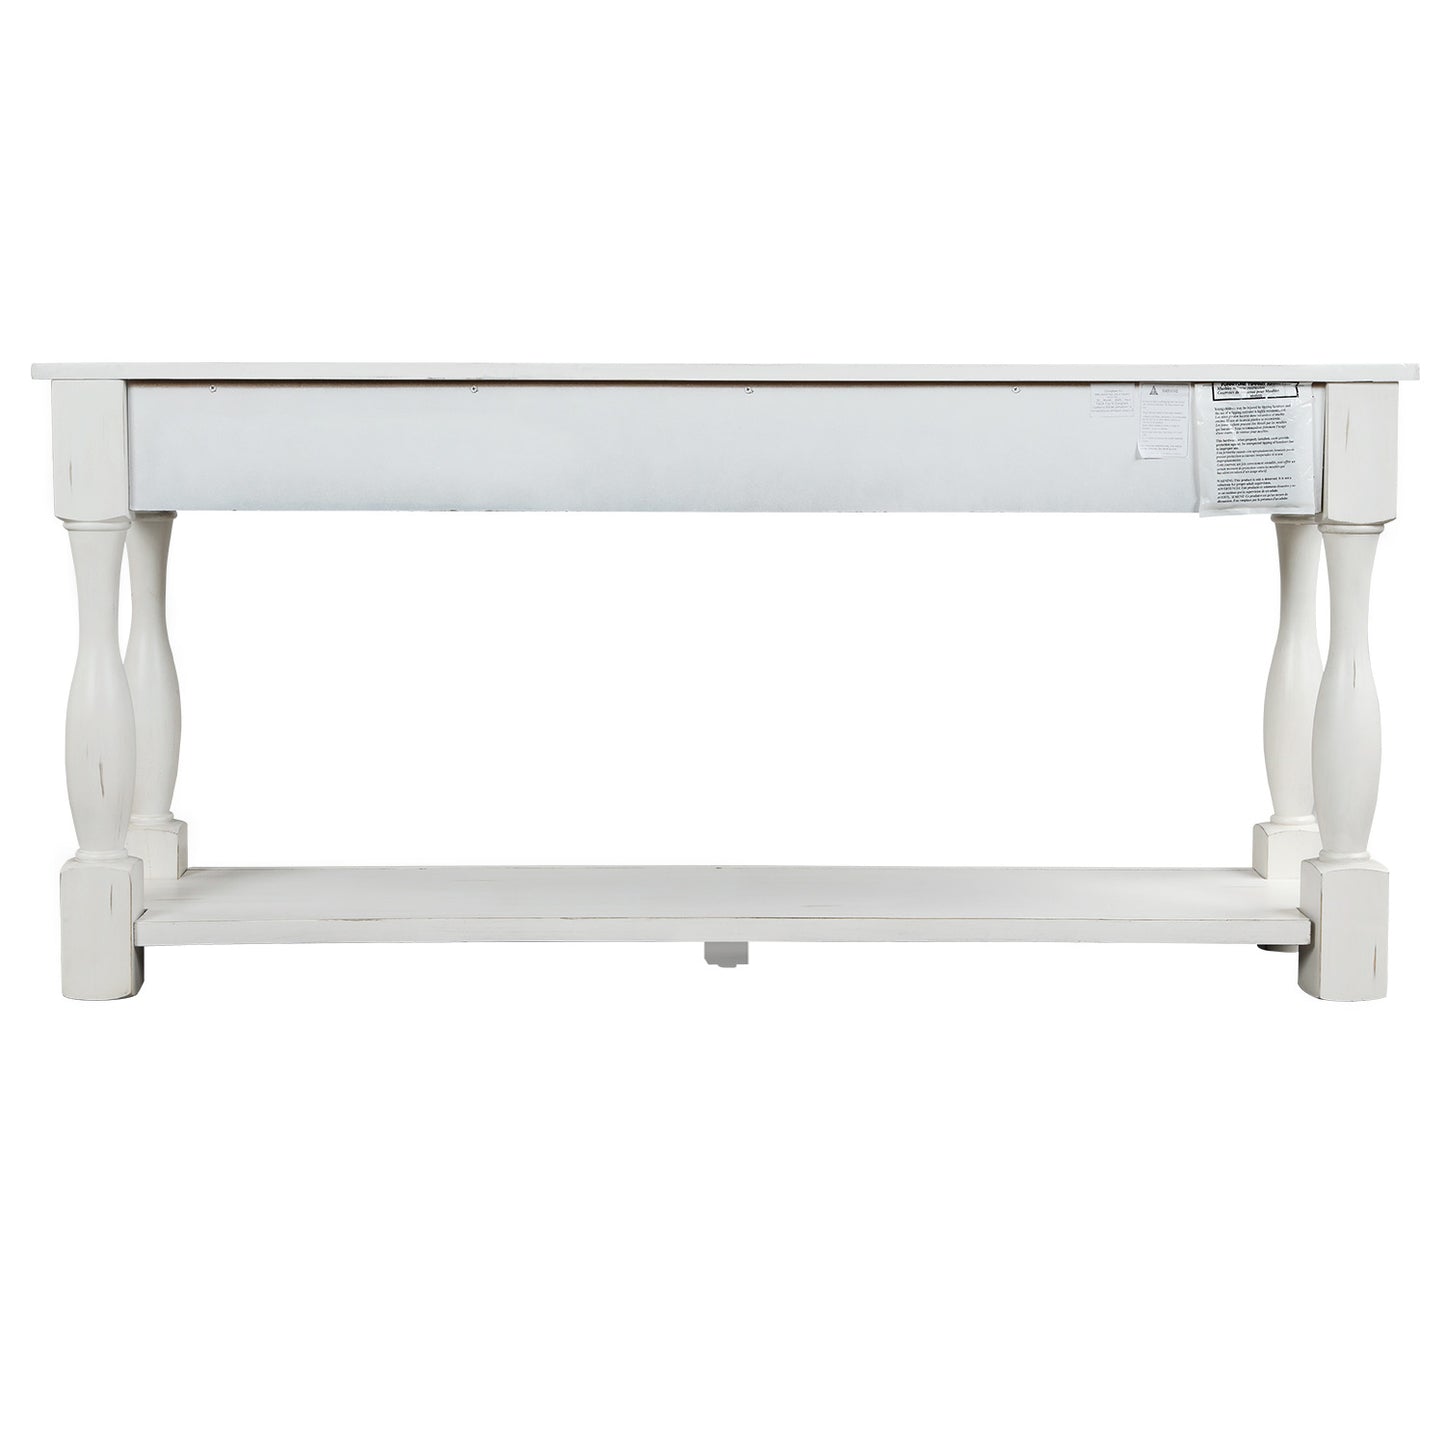 TREXM Console Table 64" Long Sofa Table Easy Assembly with Drawers and Shelf for Entryway, Hallway, Living Room (Antique White)